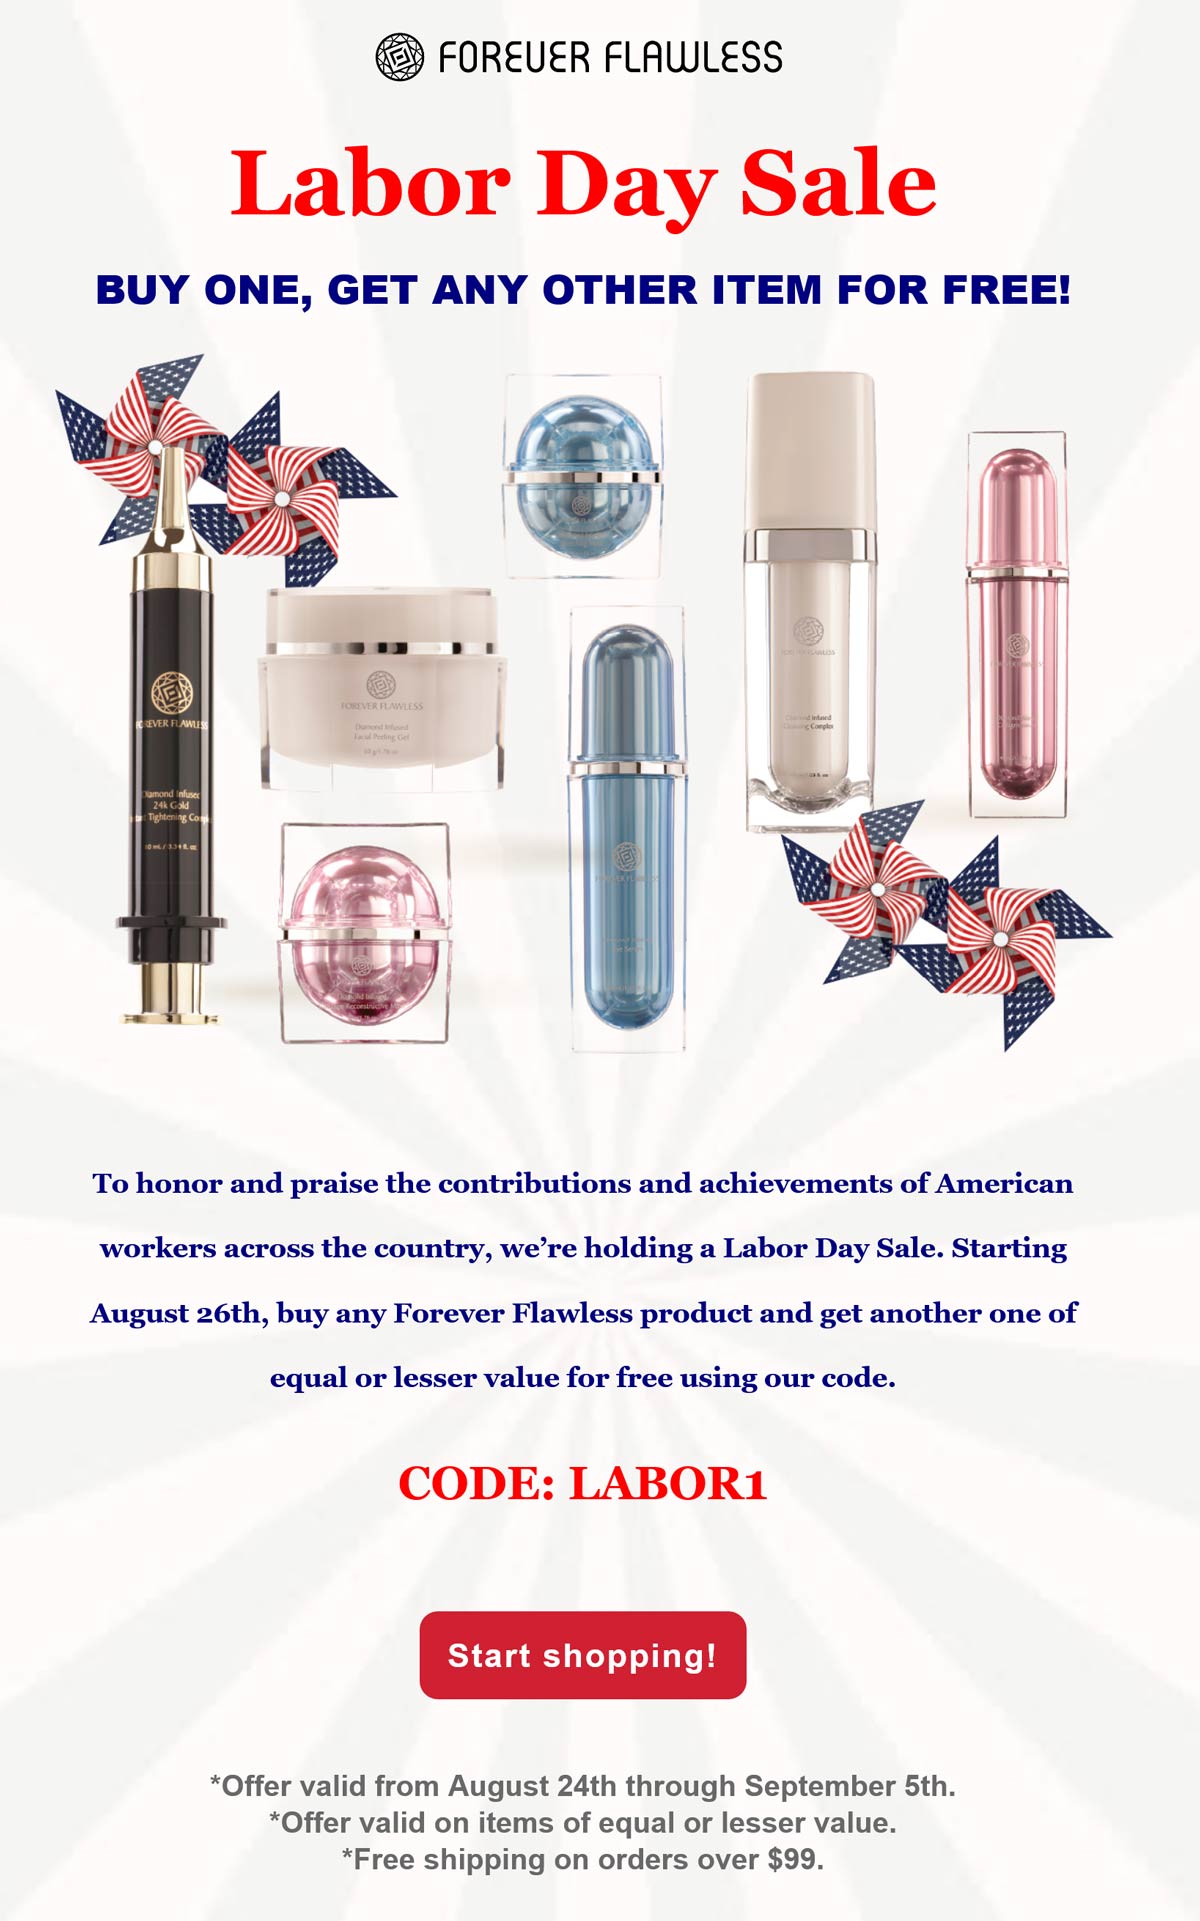 Forever Flawless stores Coupon  Second item free today at Forever Flawless via promo code LABOR1 #foreverflawless 